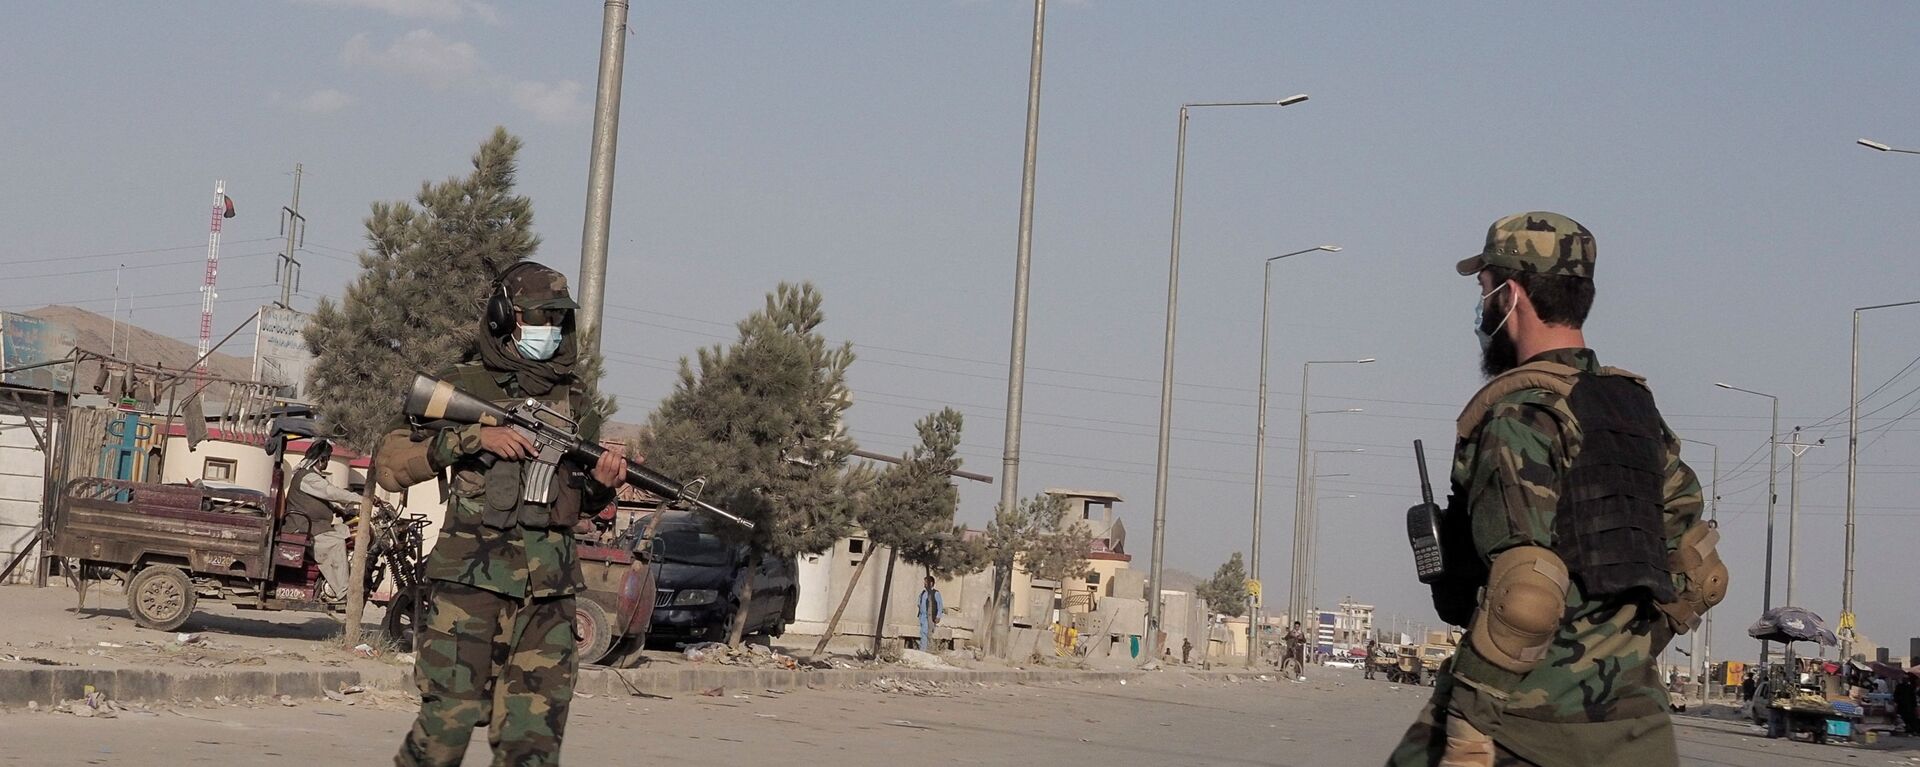 Taliban fighters guard a street leading to the Hamid Karzai International Airport in Kabul, Afghanistan August 29, 2021 - Sputnik International, 1920